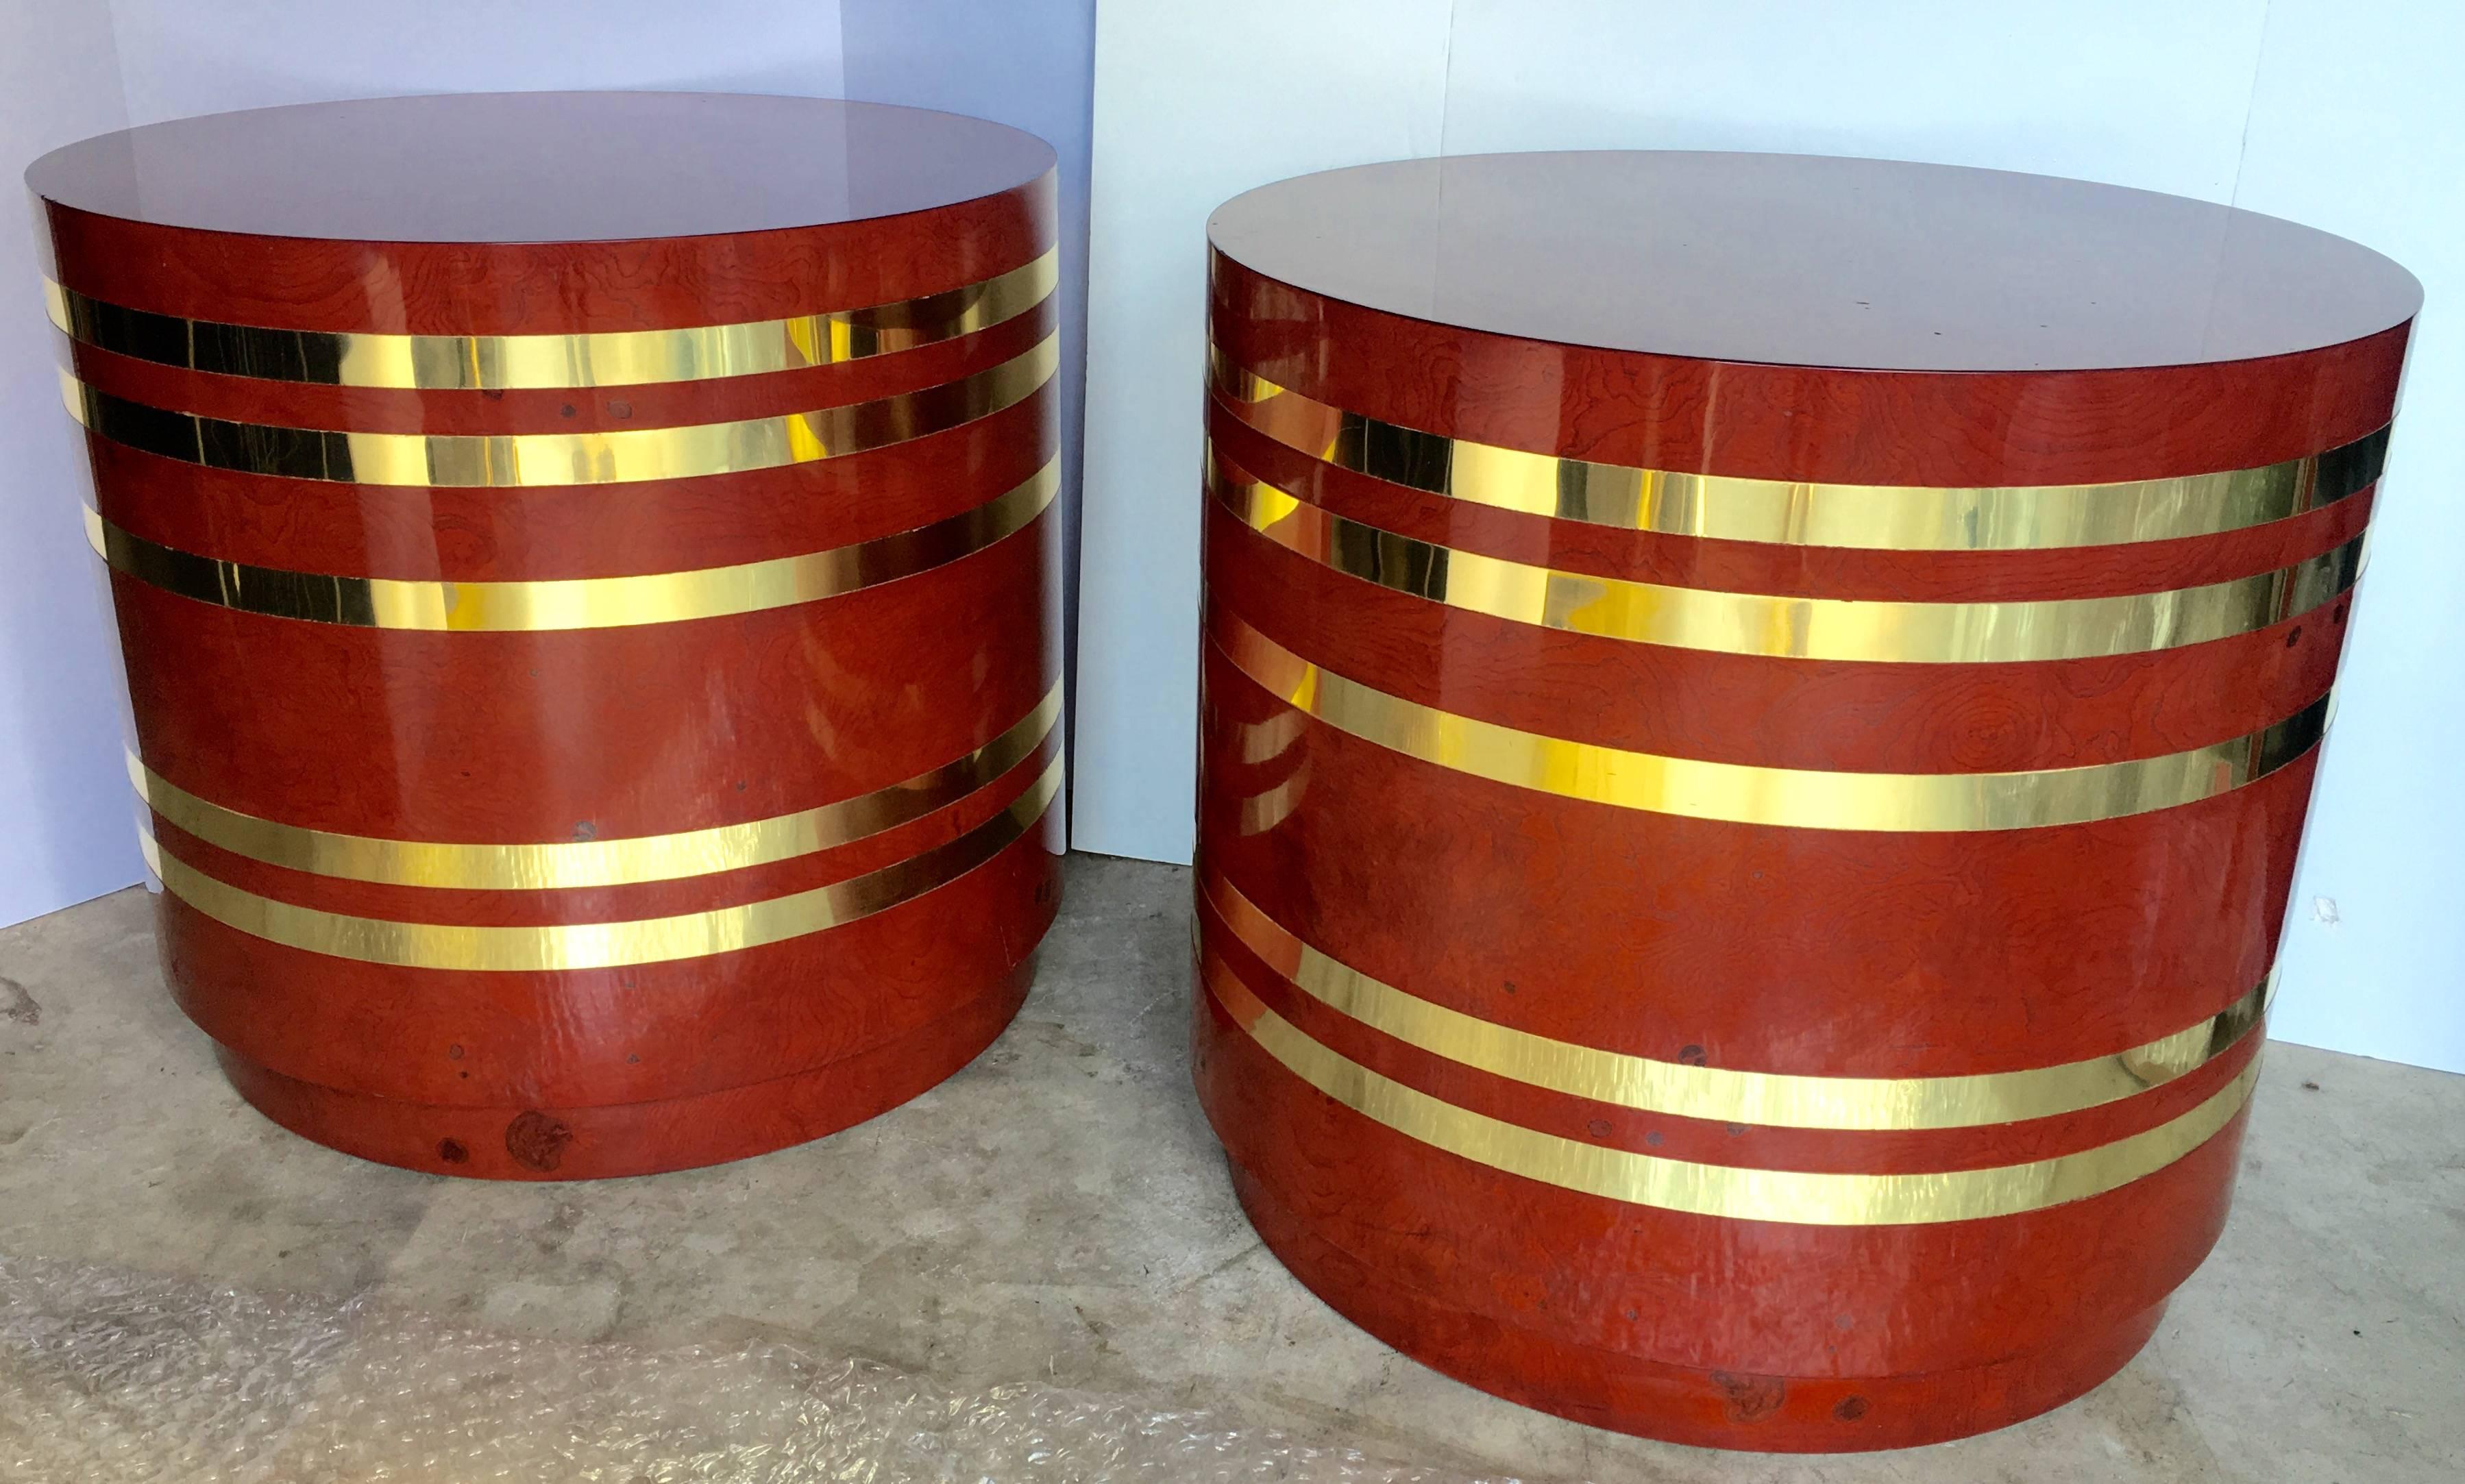 Stunning pair of large Mid-Century Modern round end side drum tables. These column pedestals feature red/burgundy burl wood veneer with striped brass bands. Beautiful glossy lacquer-like finish to burl wood. Can also be used as a unique set of